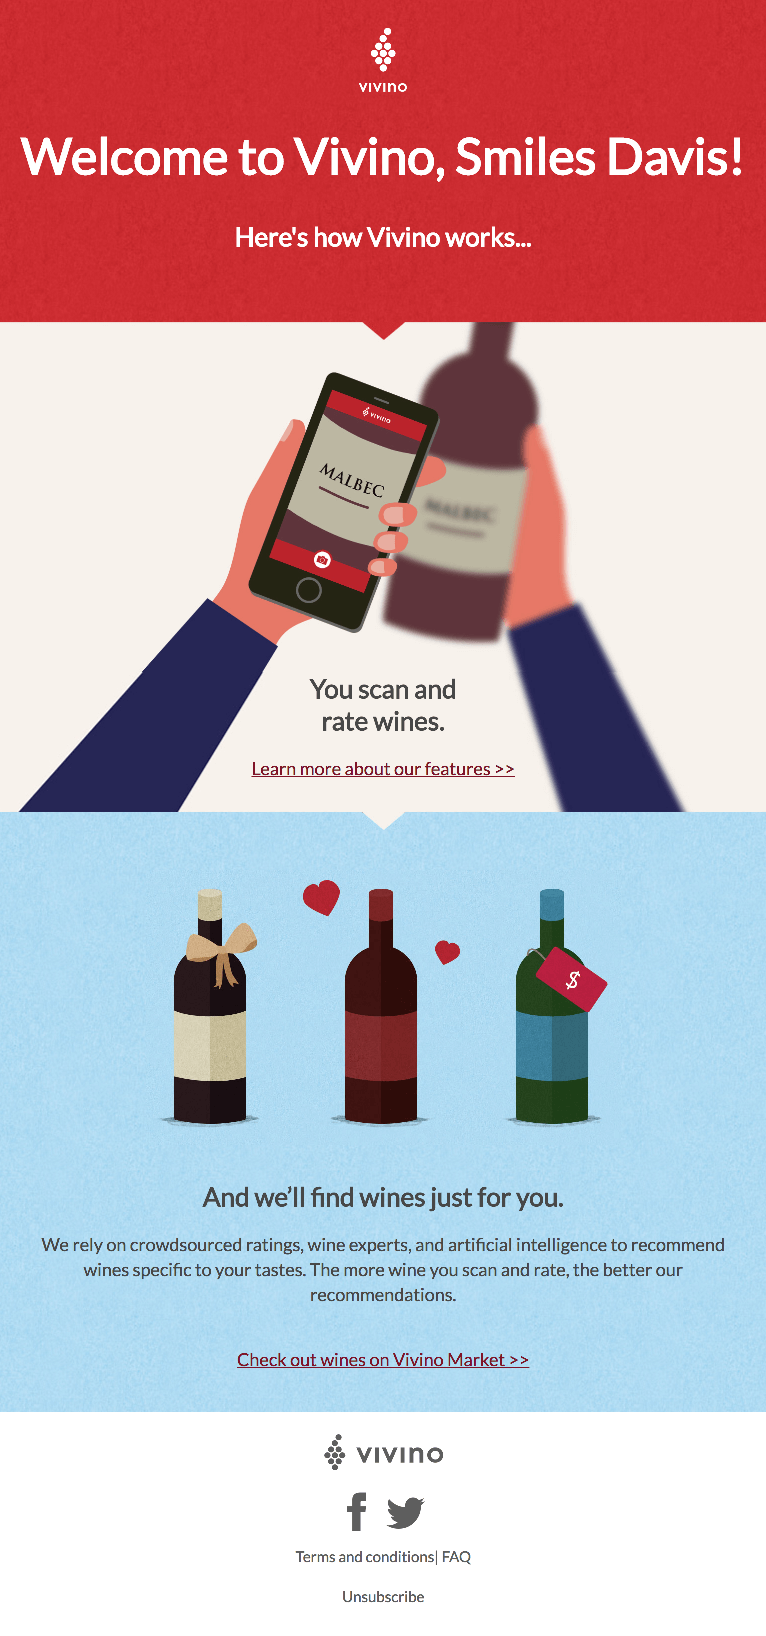 Welcome to Vivino - Really Good Emails